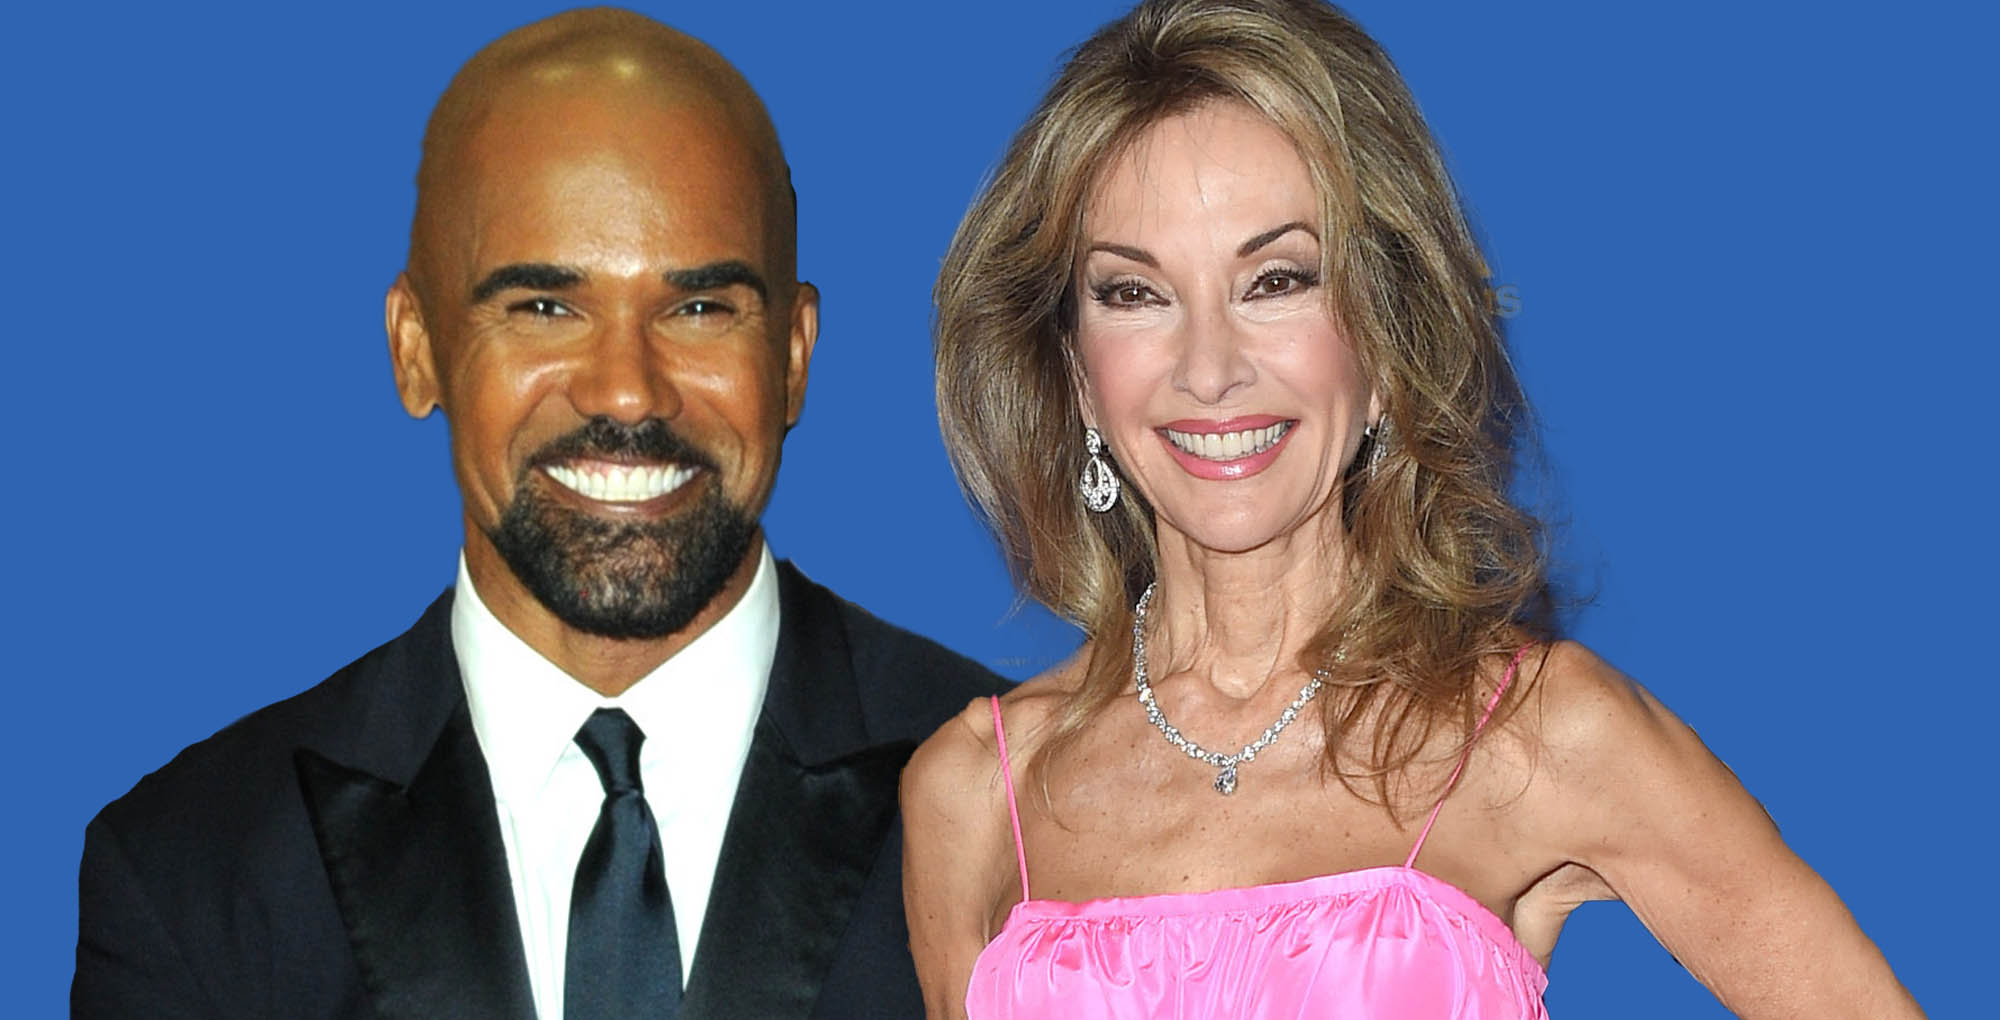 shemar moore and susan lucci against a blue background.